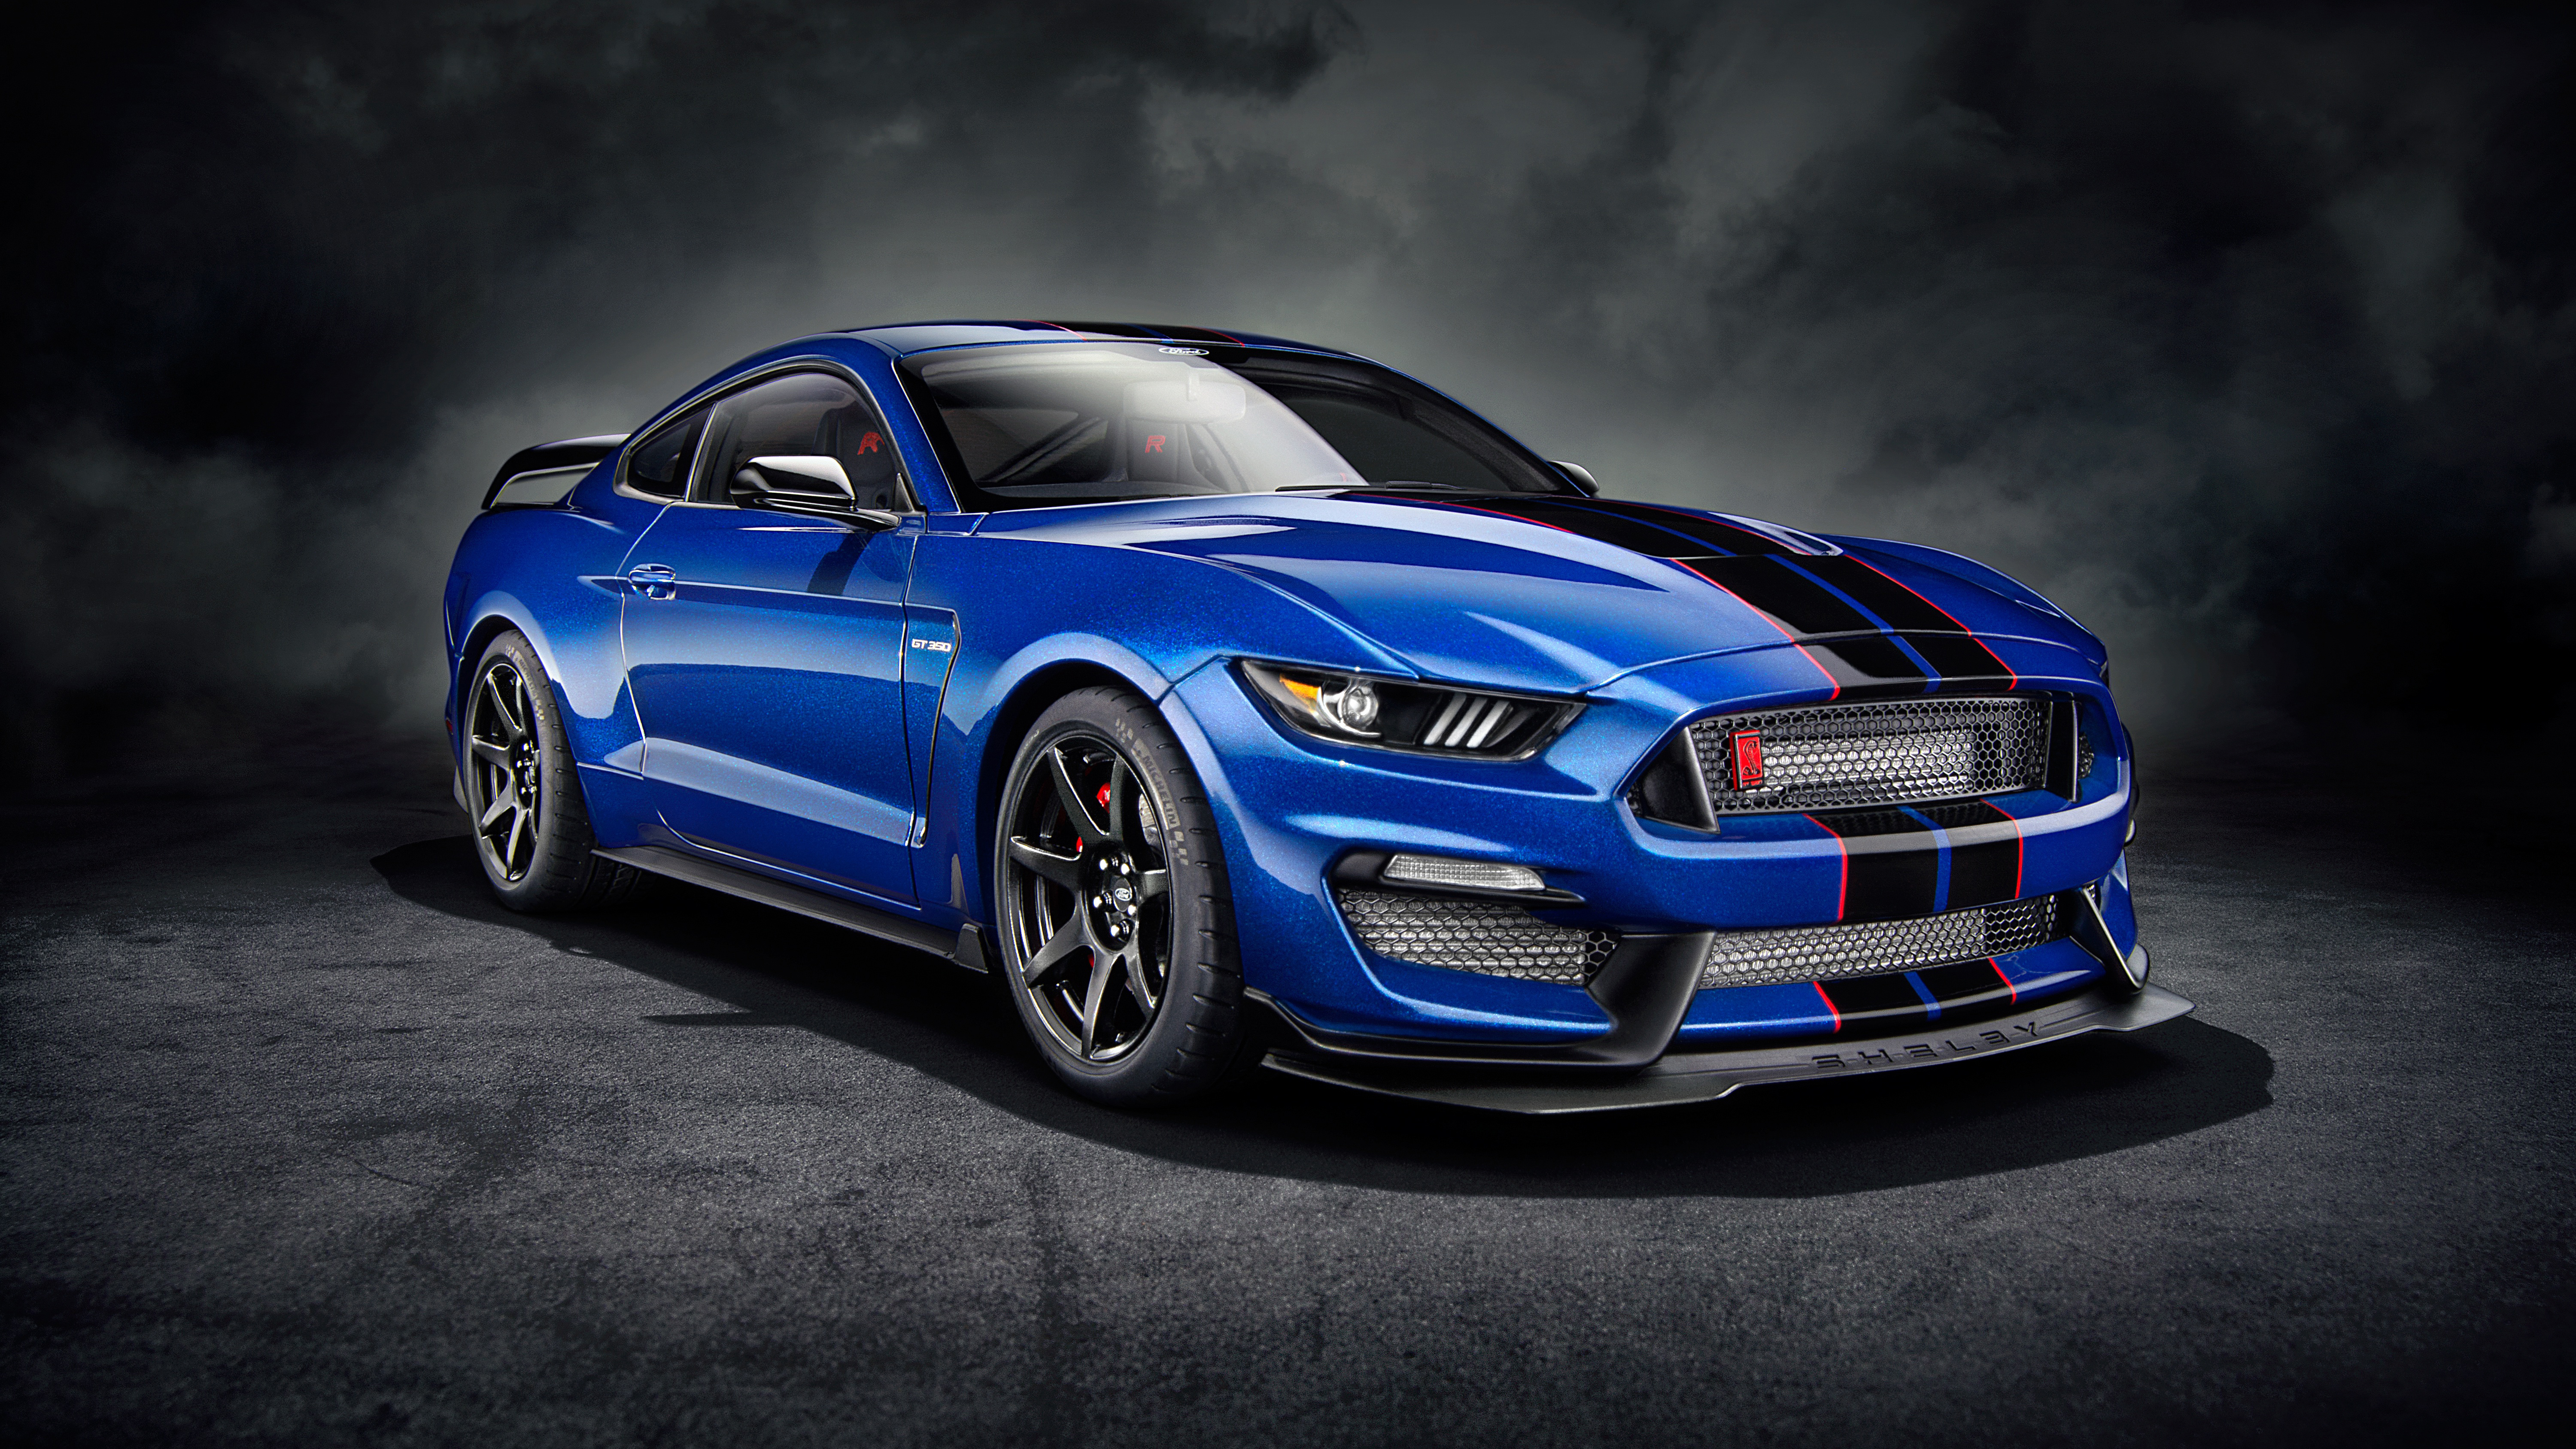 Fondos De Pantalla Vehiculo Ford Mustang Ford Mustang Shelby Coche Images